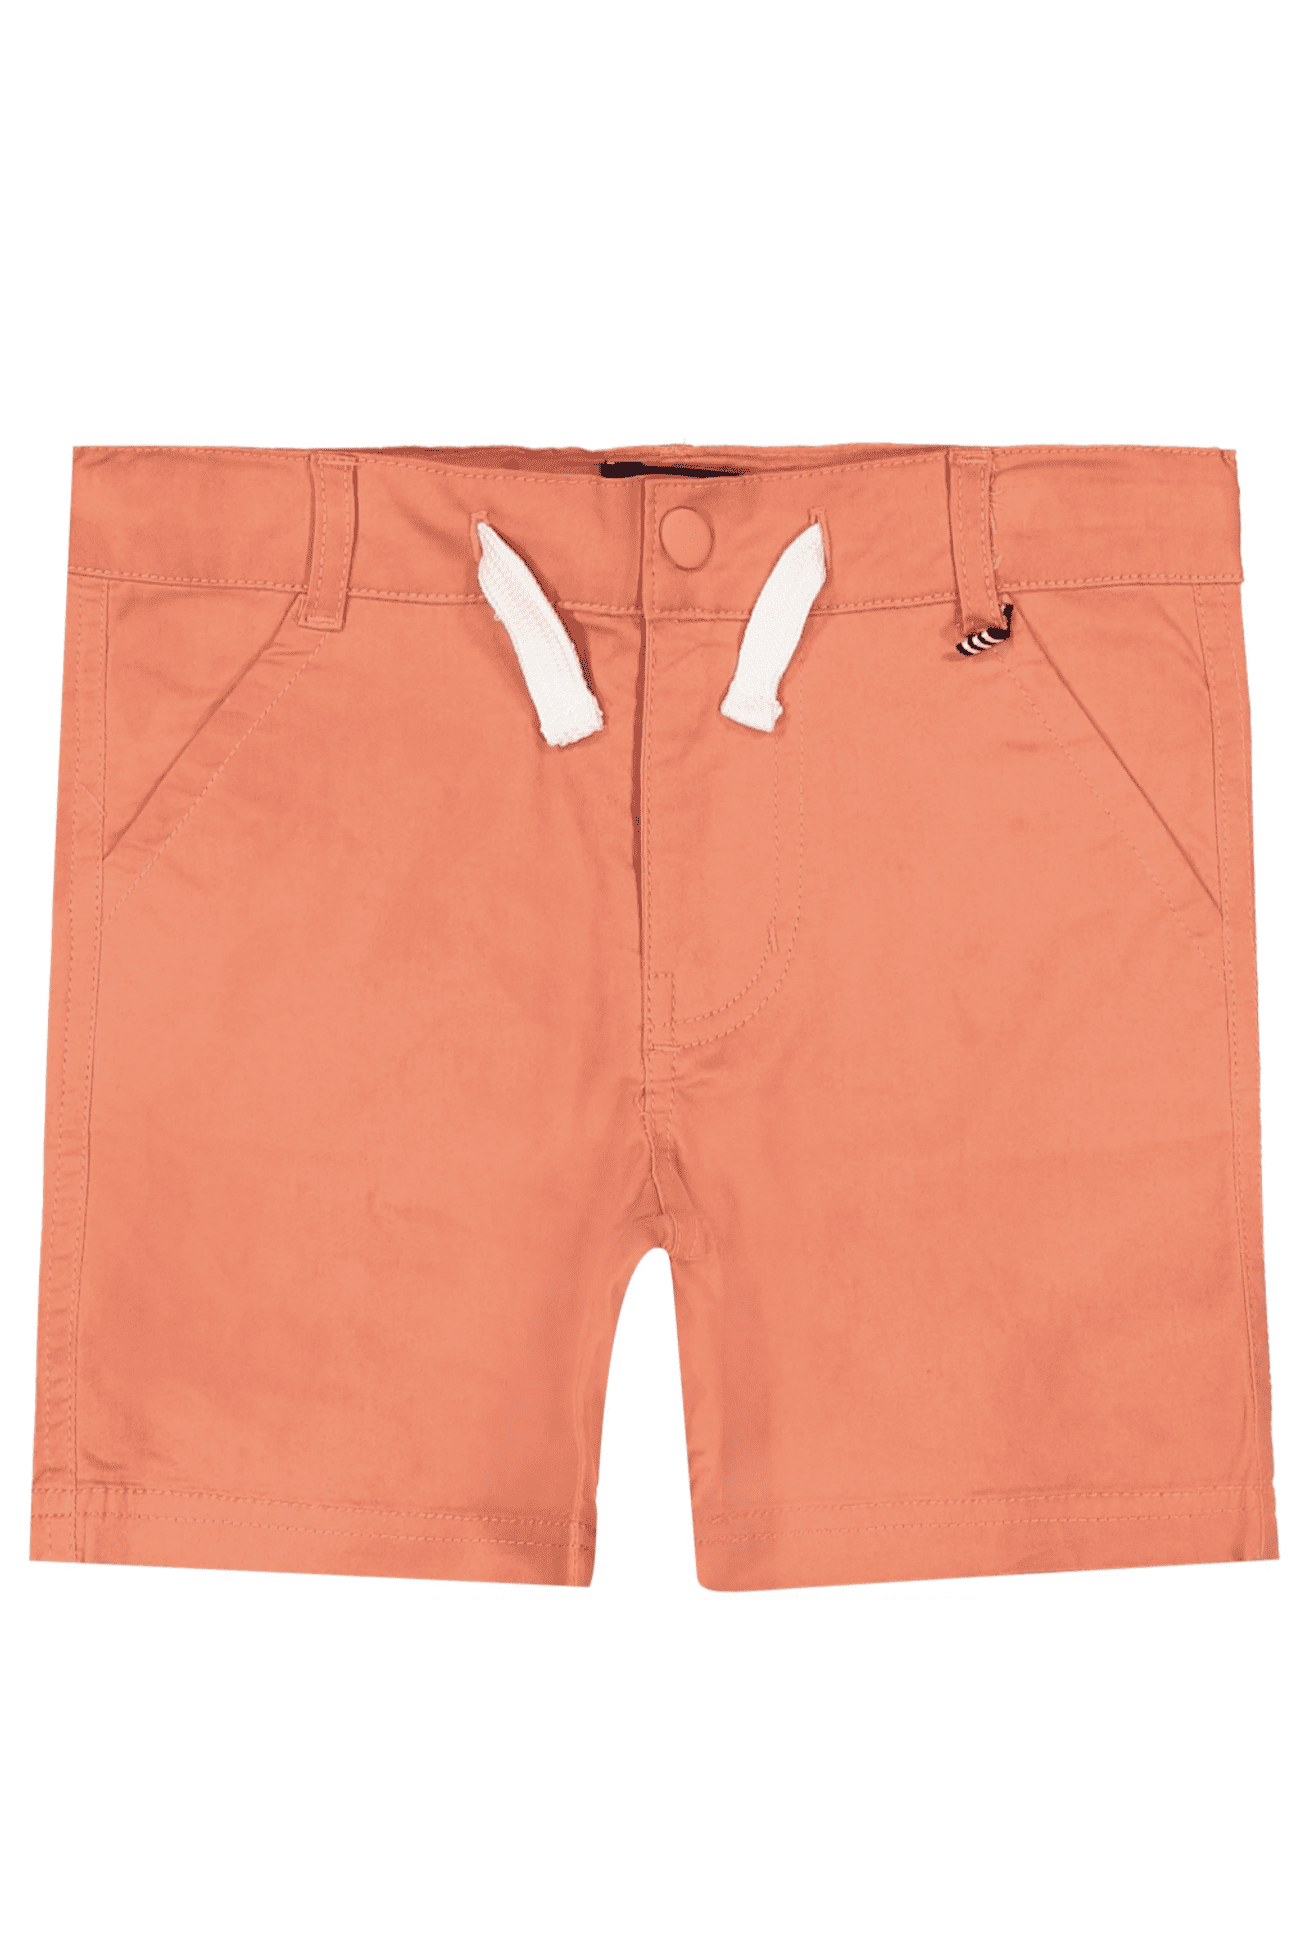 Coral Twill Shorts Tea for Three: A Children's Boutique